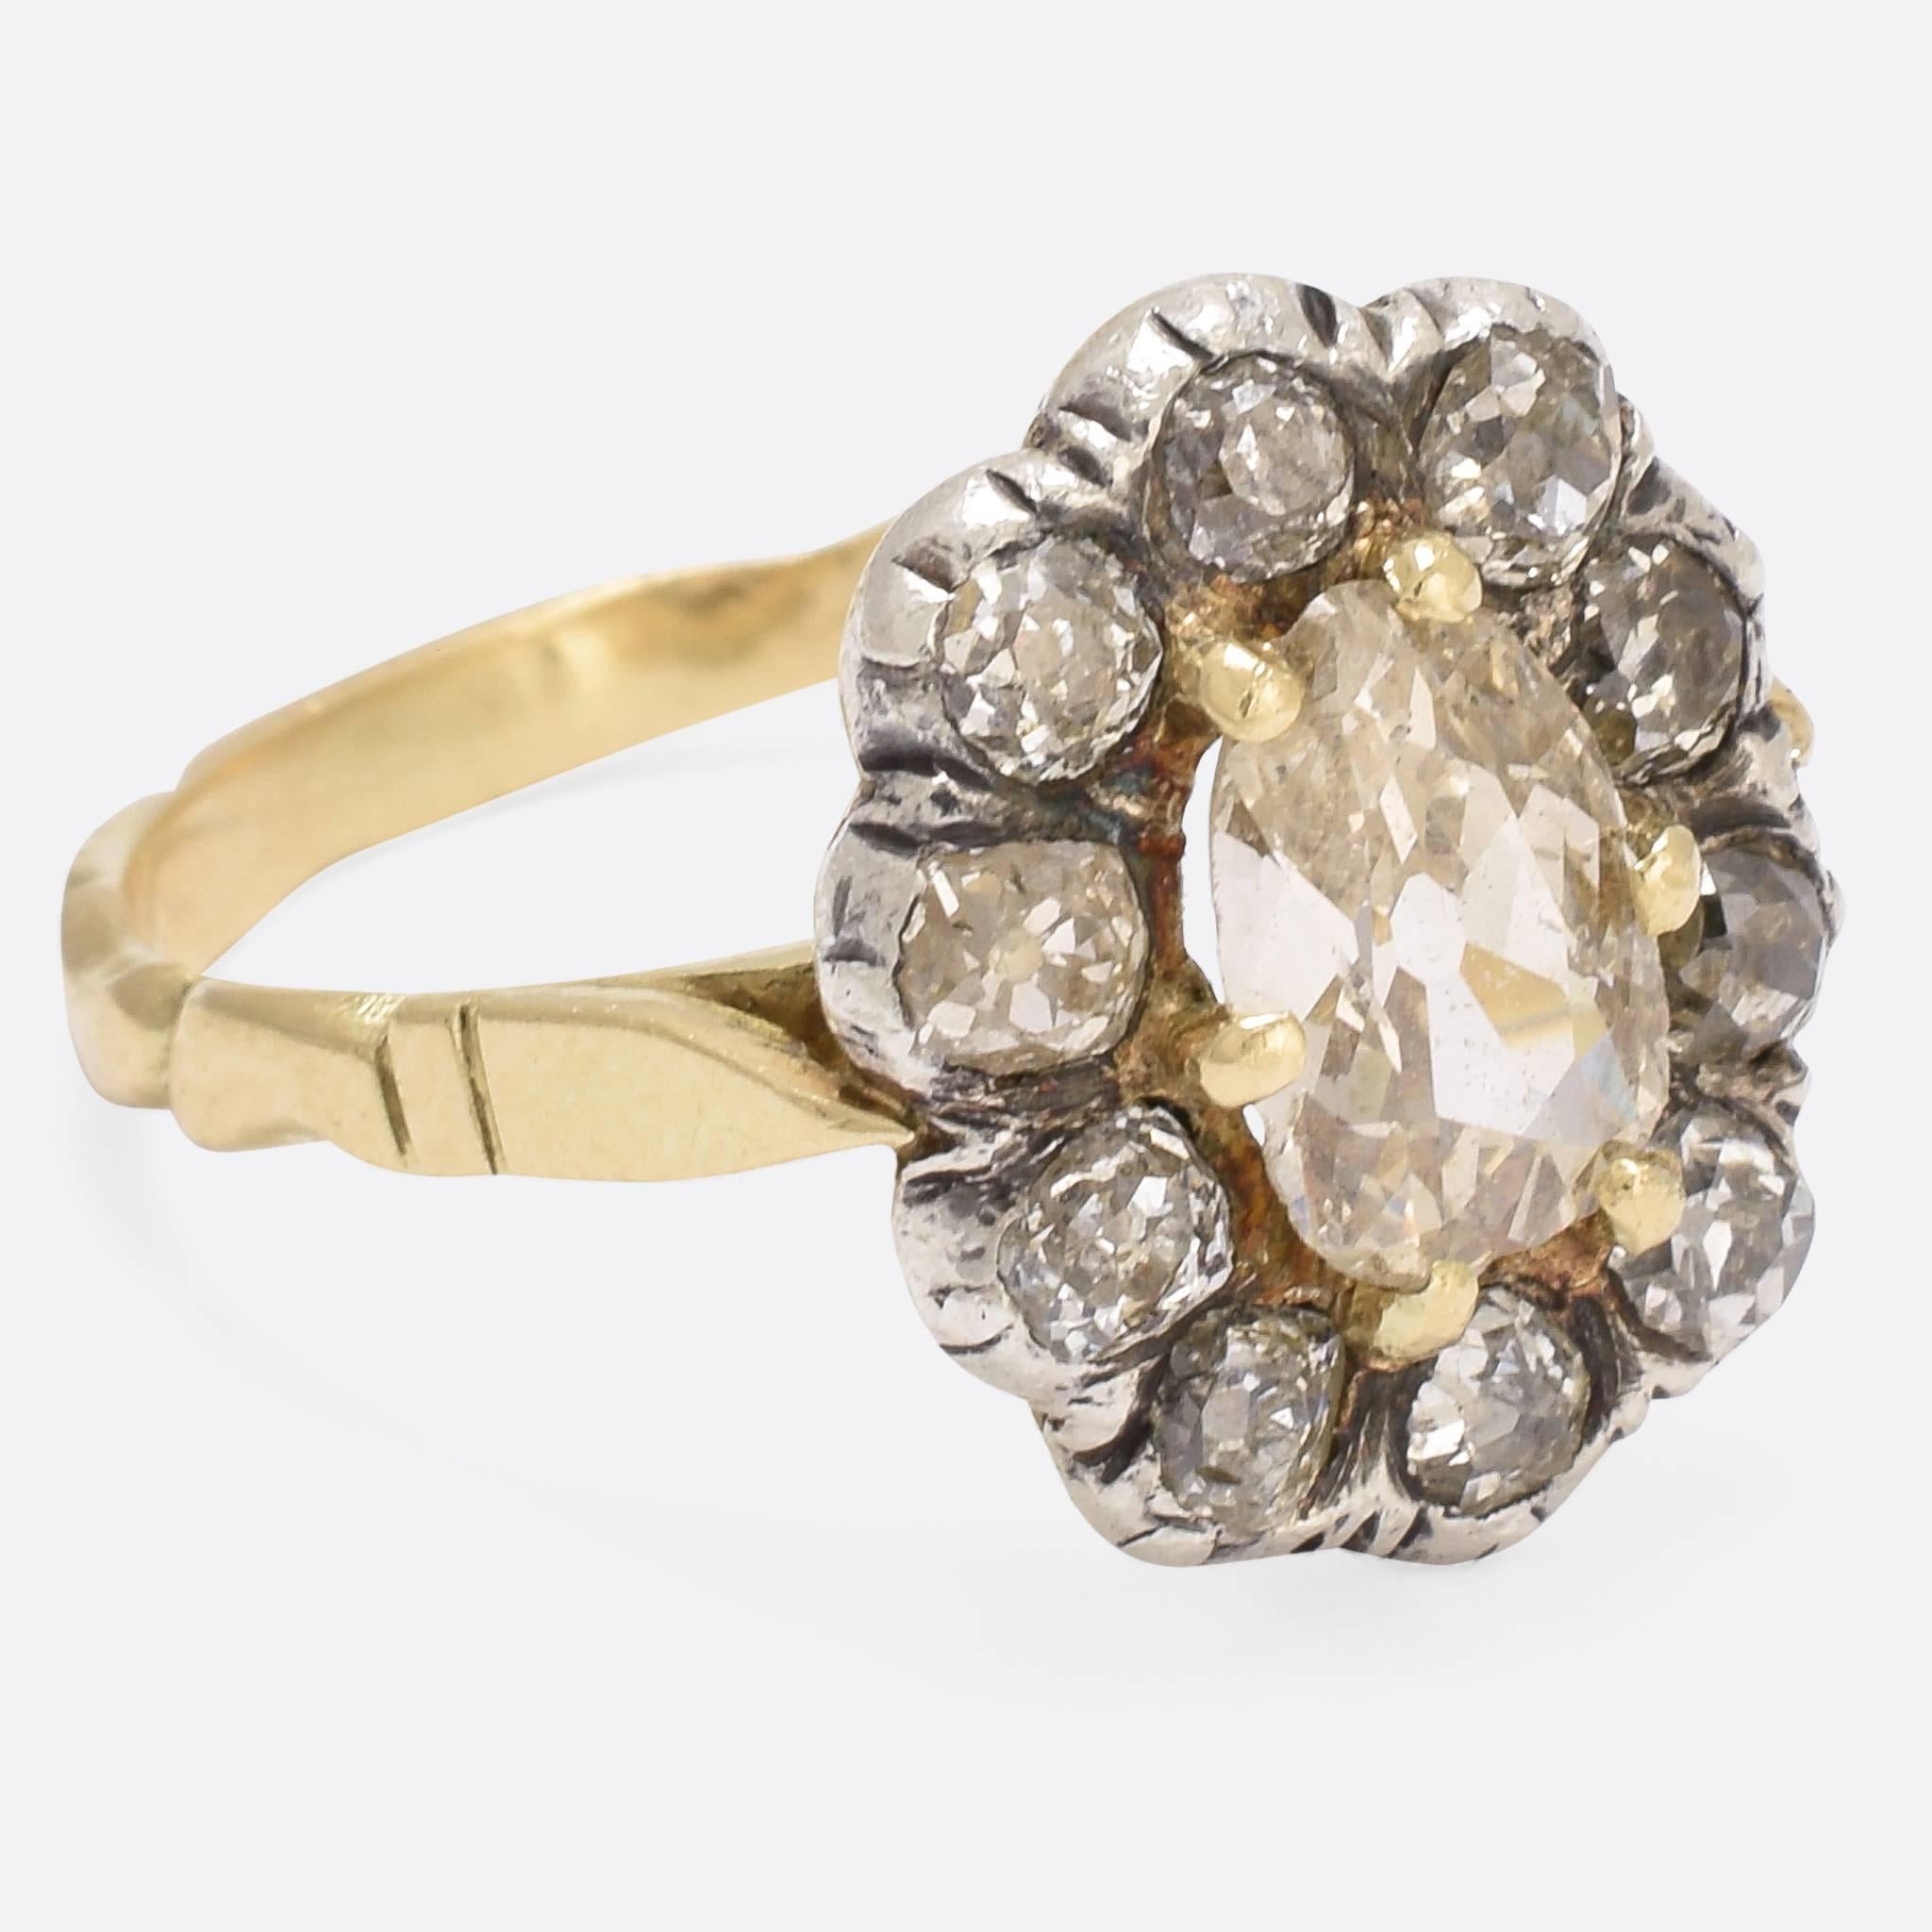 This magnificent Georgian diamond cluster ring is set with a gorgeous old pear cut champagne diamond, surrounded by a cluster of old mine cuts - total diamond weight 2.5 carats. Resting on a rococo style band, the head was once closed backed but has